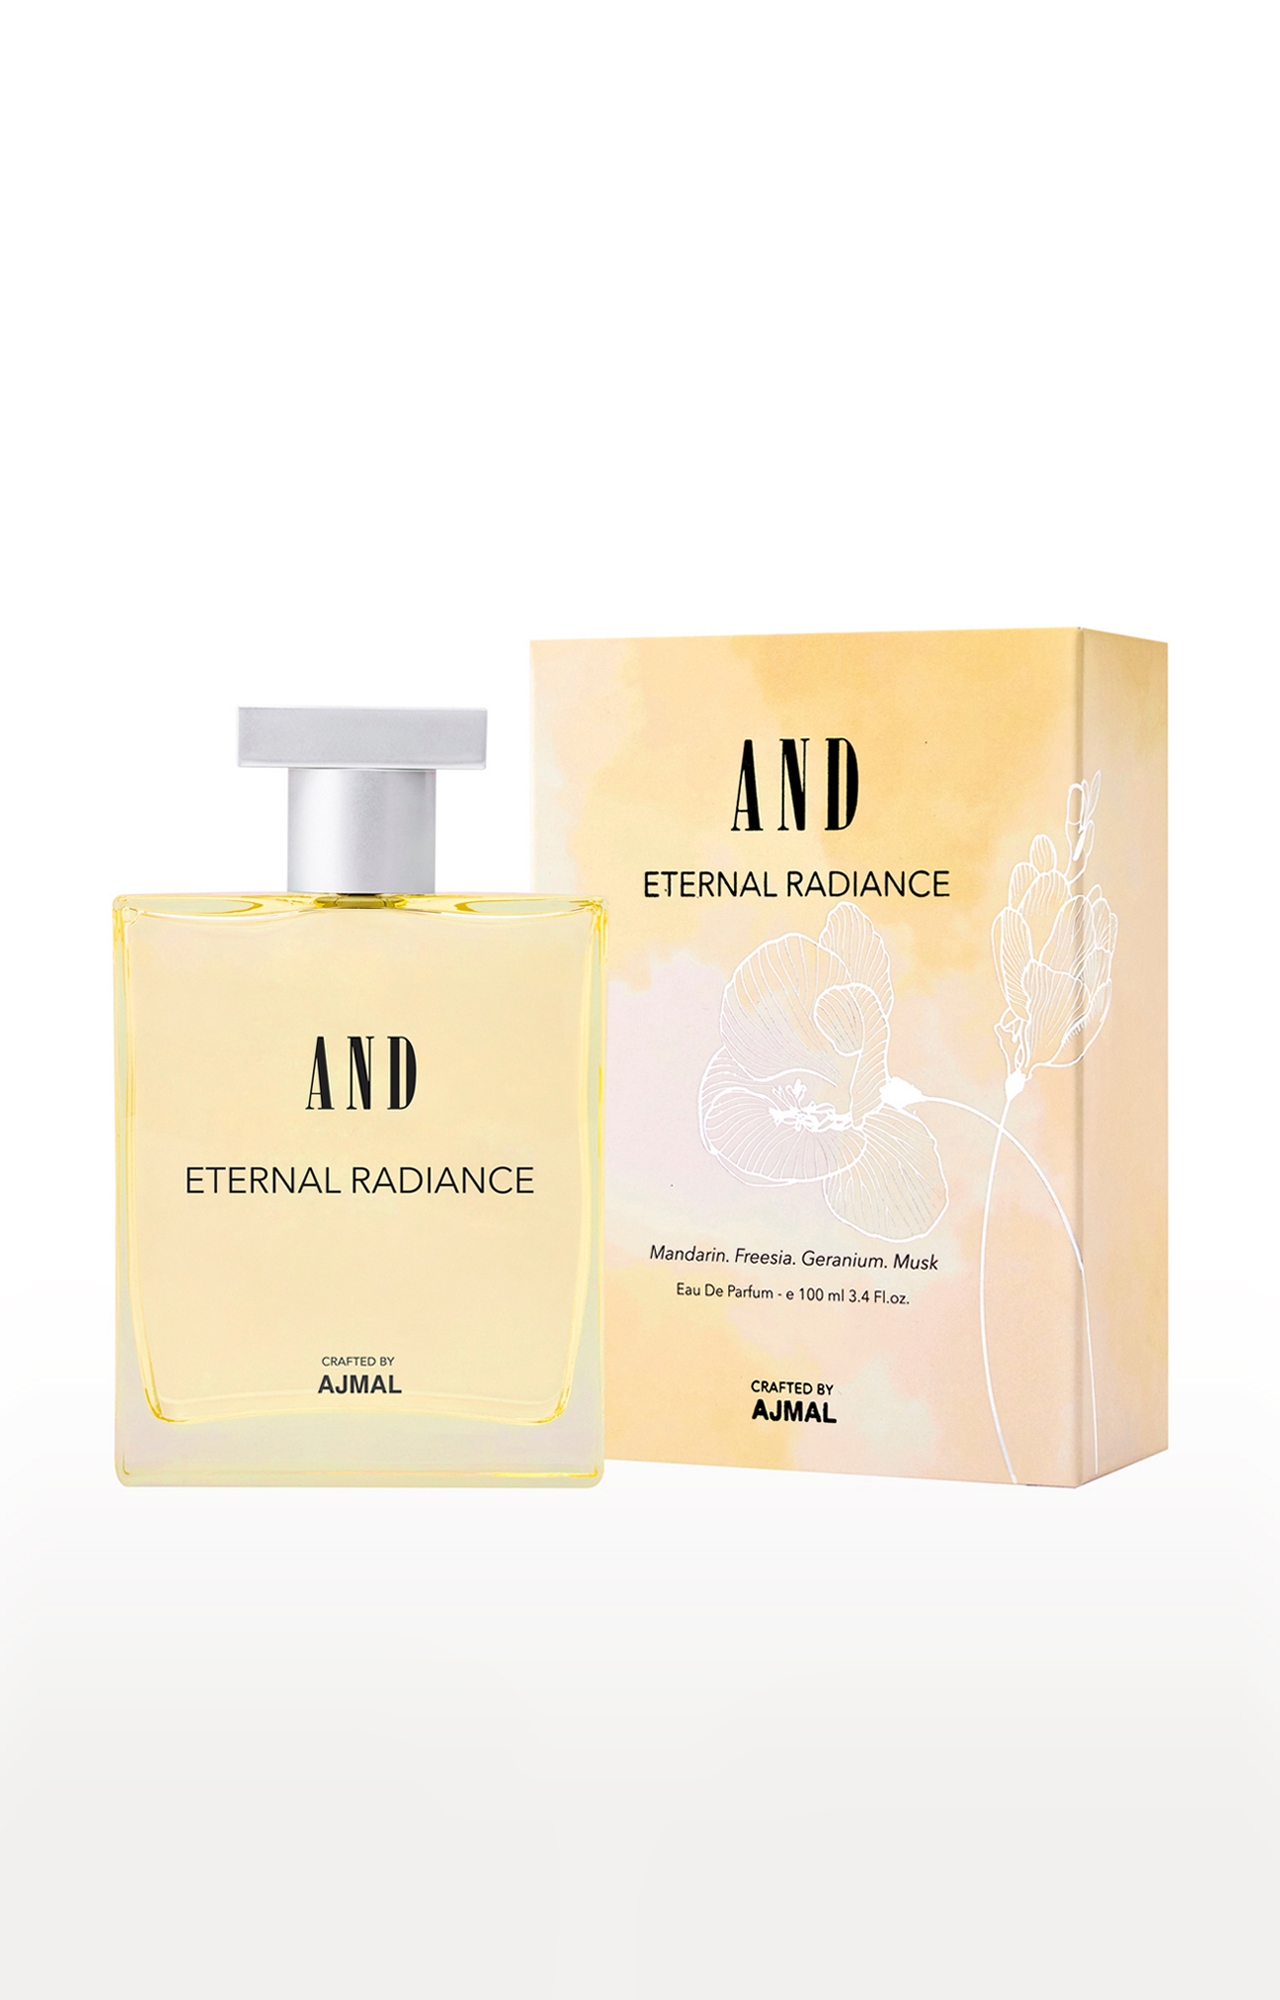 And Eternal Radiance Eau De Parfum 100ML Long Lasting Scent Spray Gift For Women Crafted By Ajmal